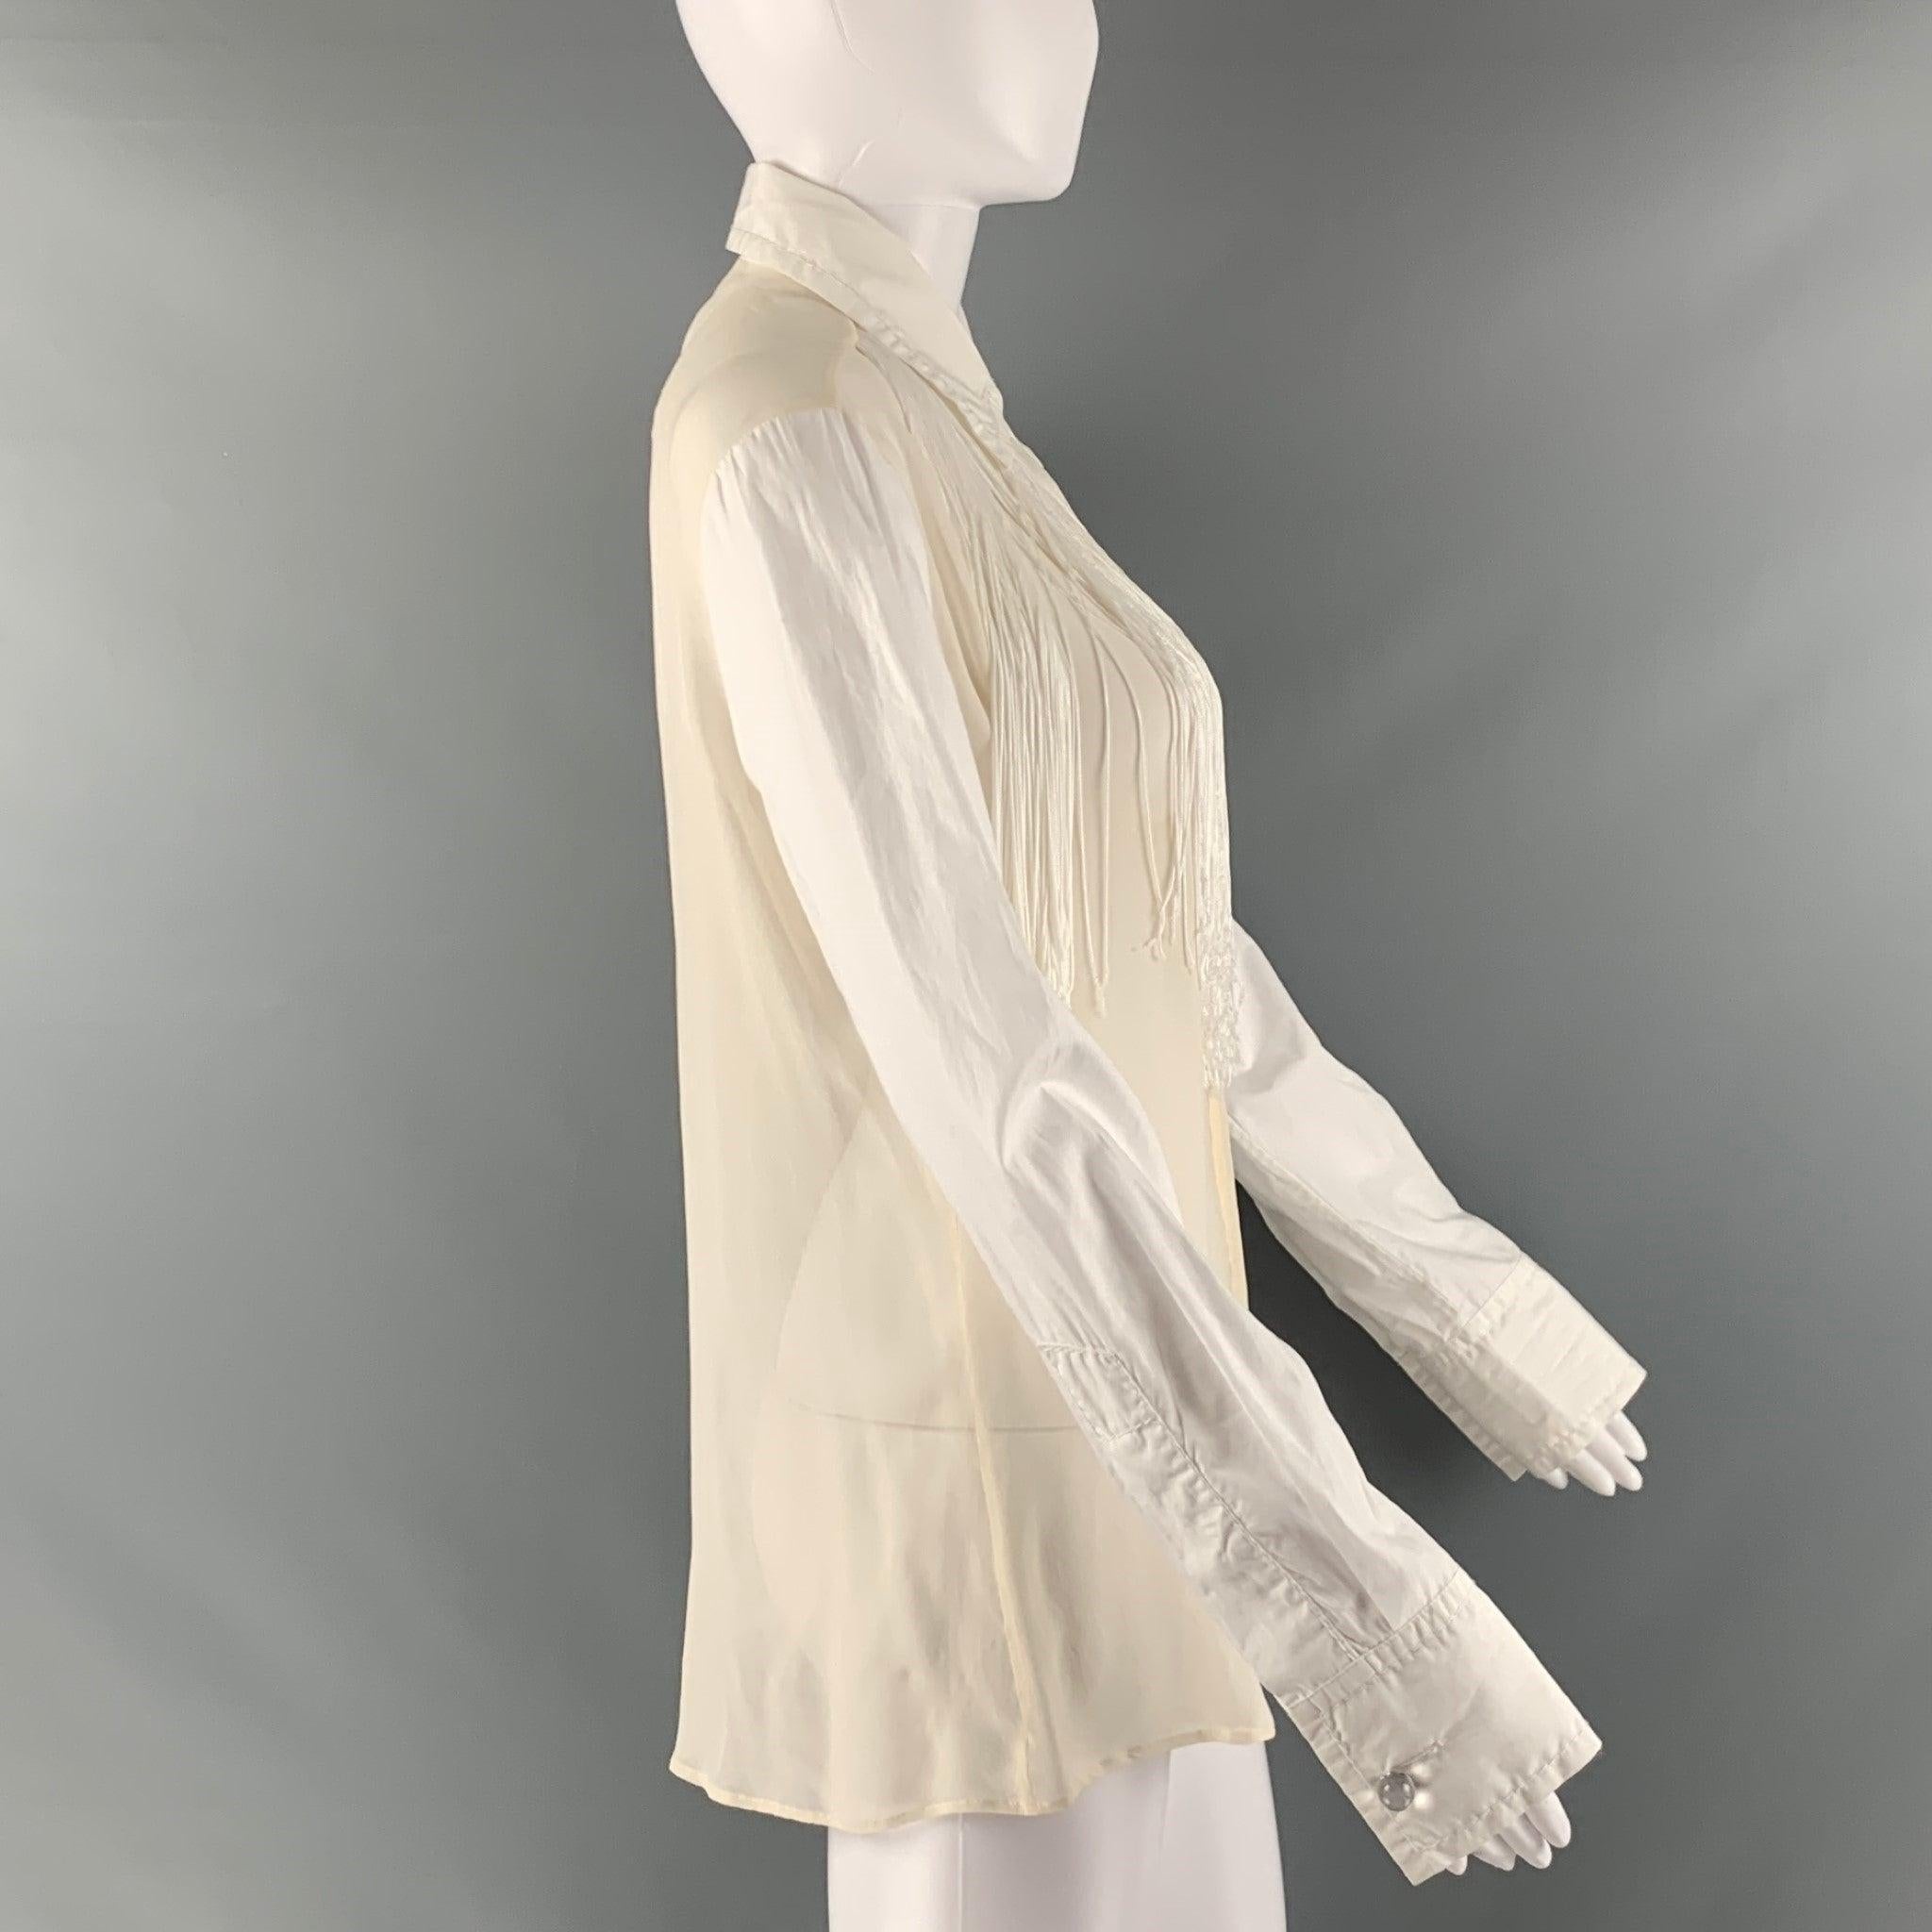 VIKTOR & ROLF shirt comes in a white and beige cotton woven material featuring a see through style, white fringe trim, spread collar, and a button up closure. Made in Italy. Excellent Pre-Owned Condition.  

Marked:   42 

Measurements: 
 
Shoulder: